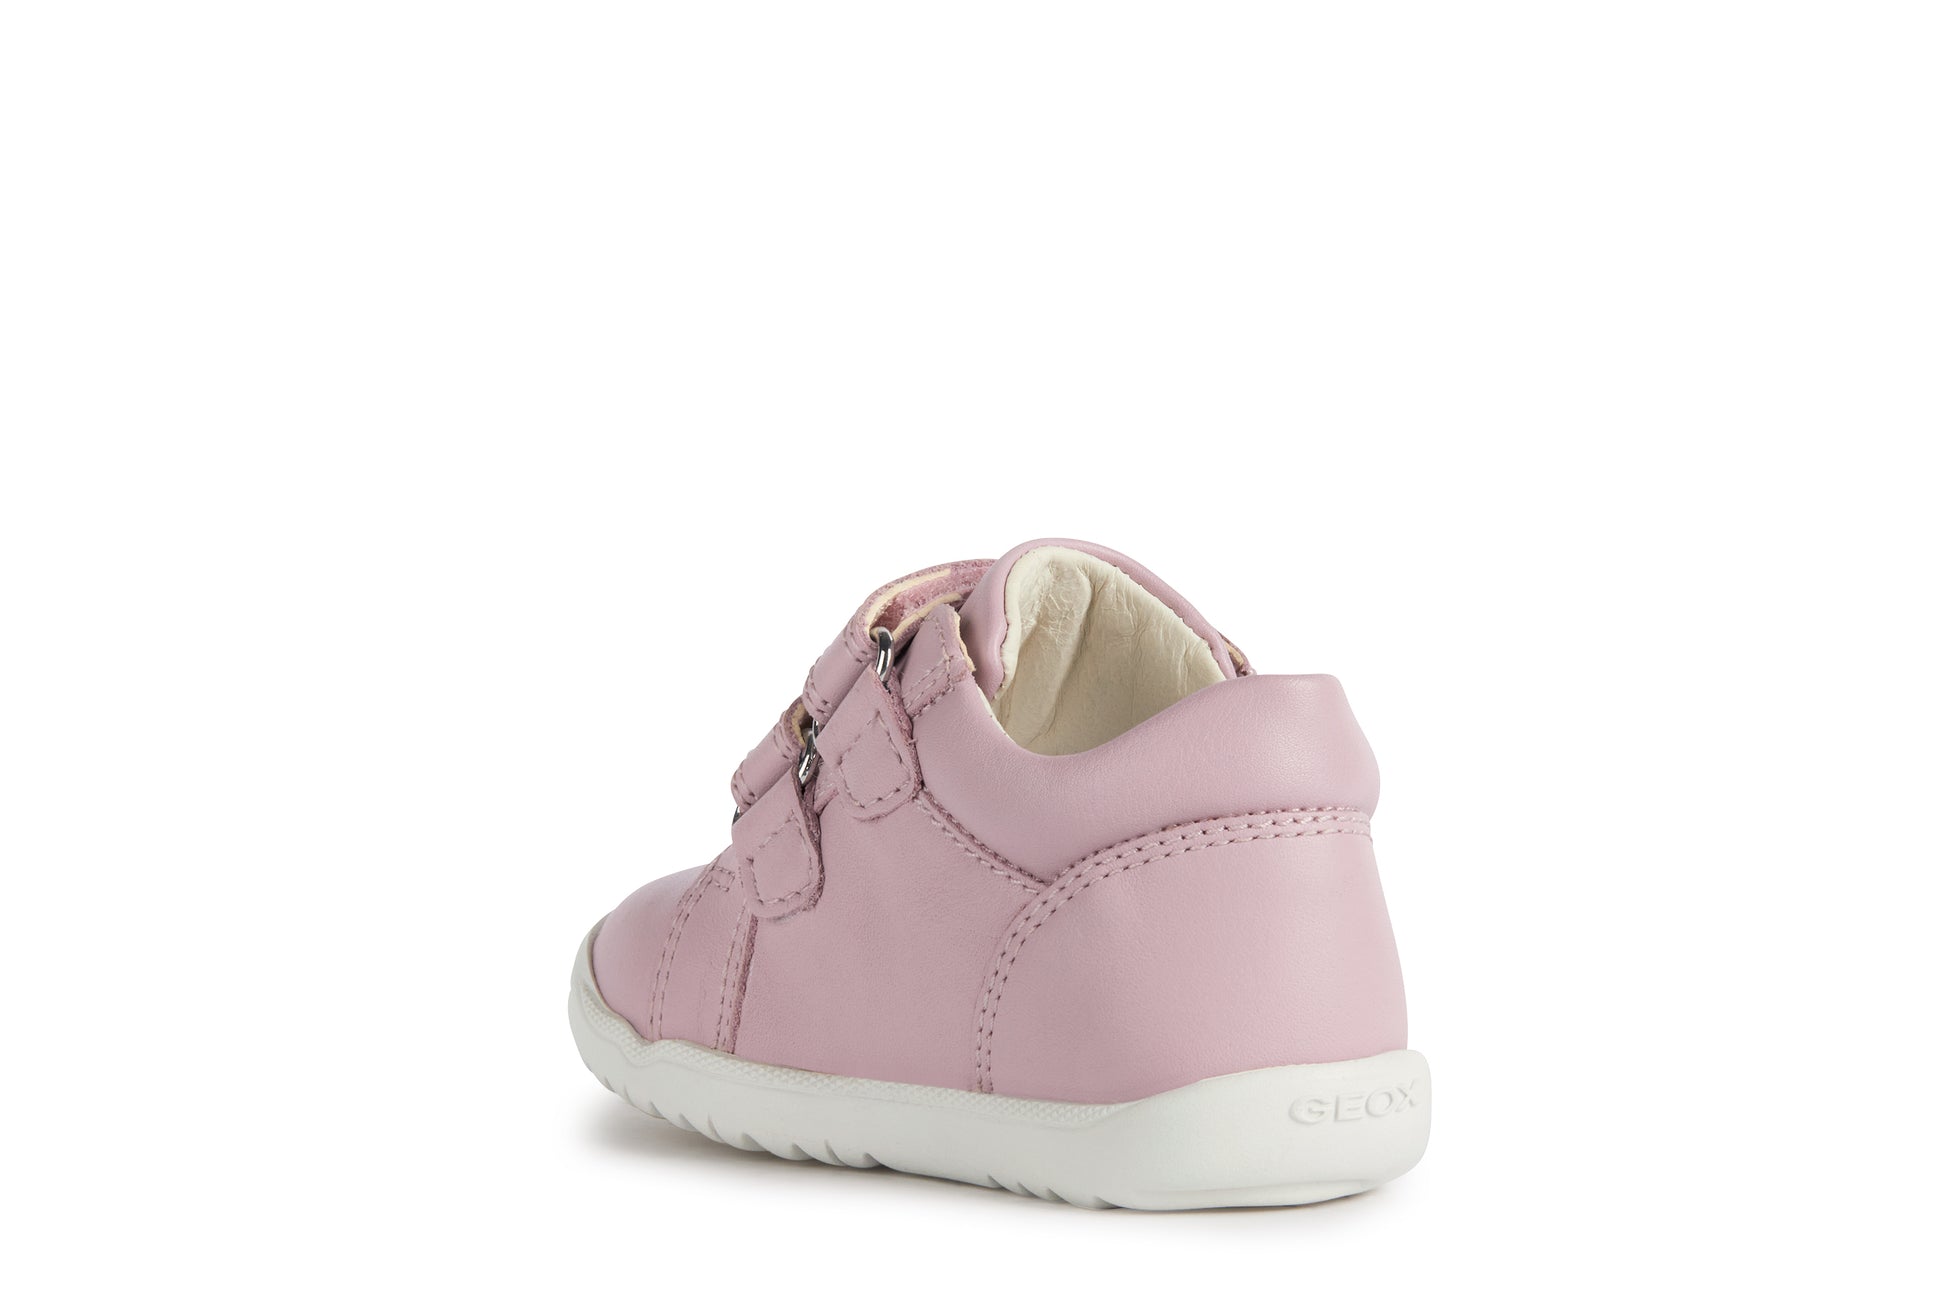 A girls shoe by Geox, style B Macchia, in pink leather with white trim and double velcro fastening. Angled view of left side.